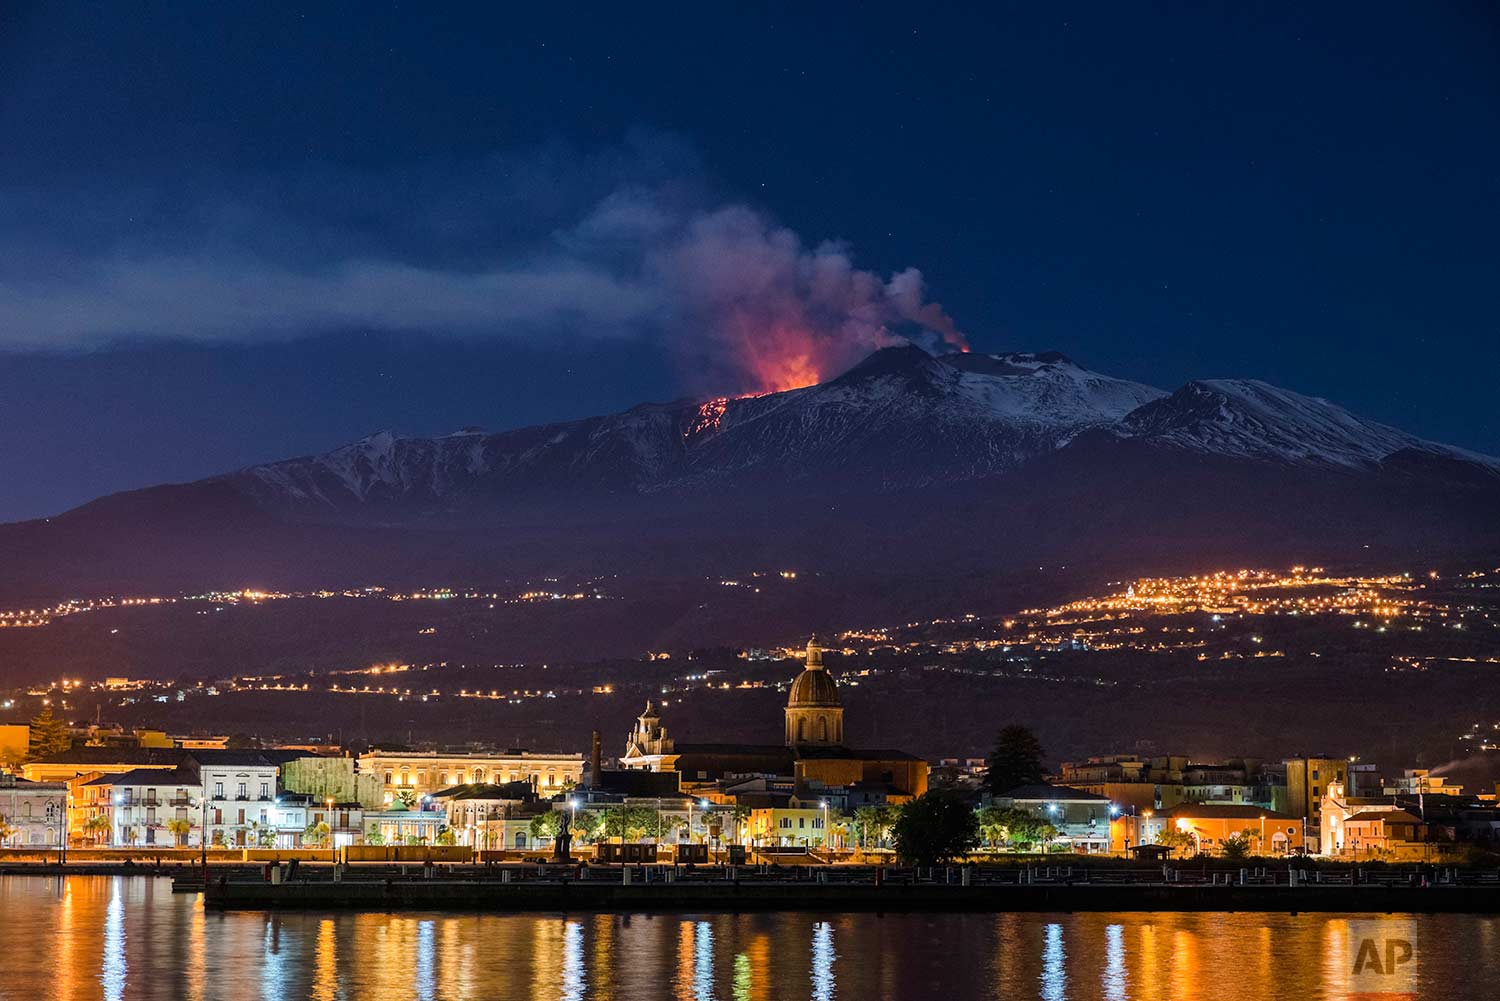  In this Tuesday, April 11, 2017 photo, Mount Etna, Europe's most active volcano, spews lava as the Sicilian town of Riposto, Italy, is visible in foreground, during an eruption. (AP Photo/Salvatore Allegra) 